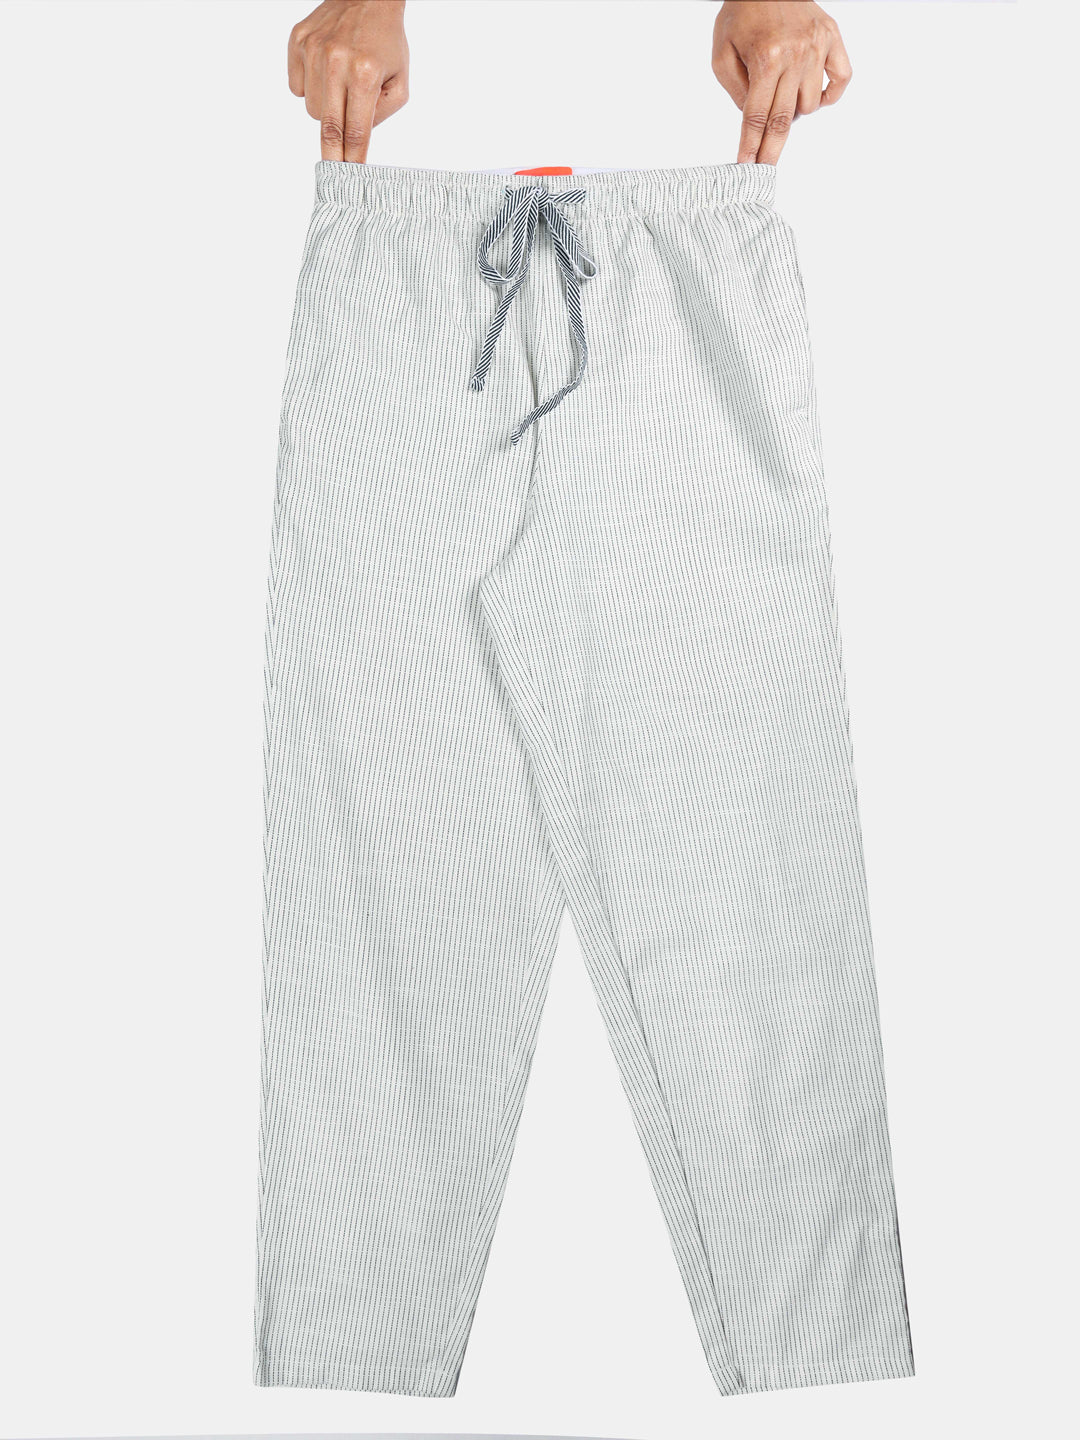 The Dashed to Perfection Women PJ Pants